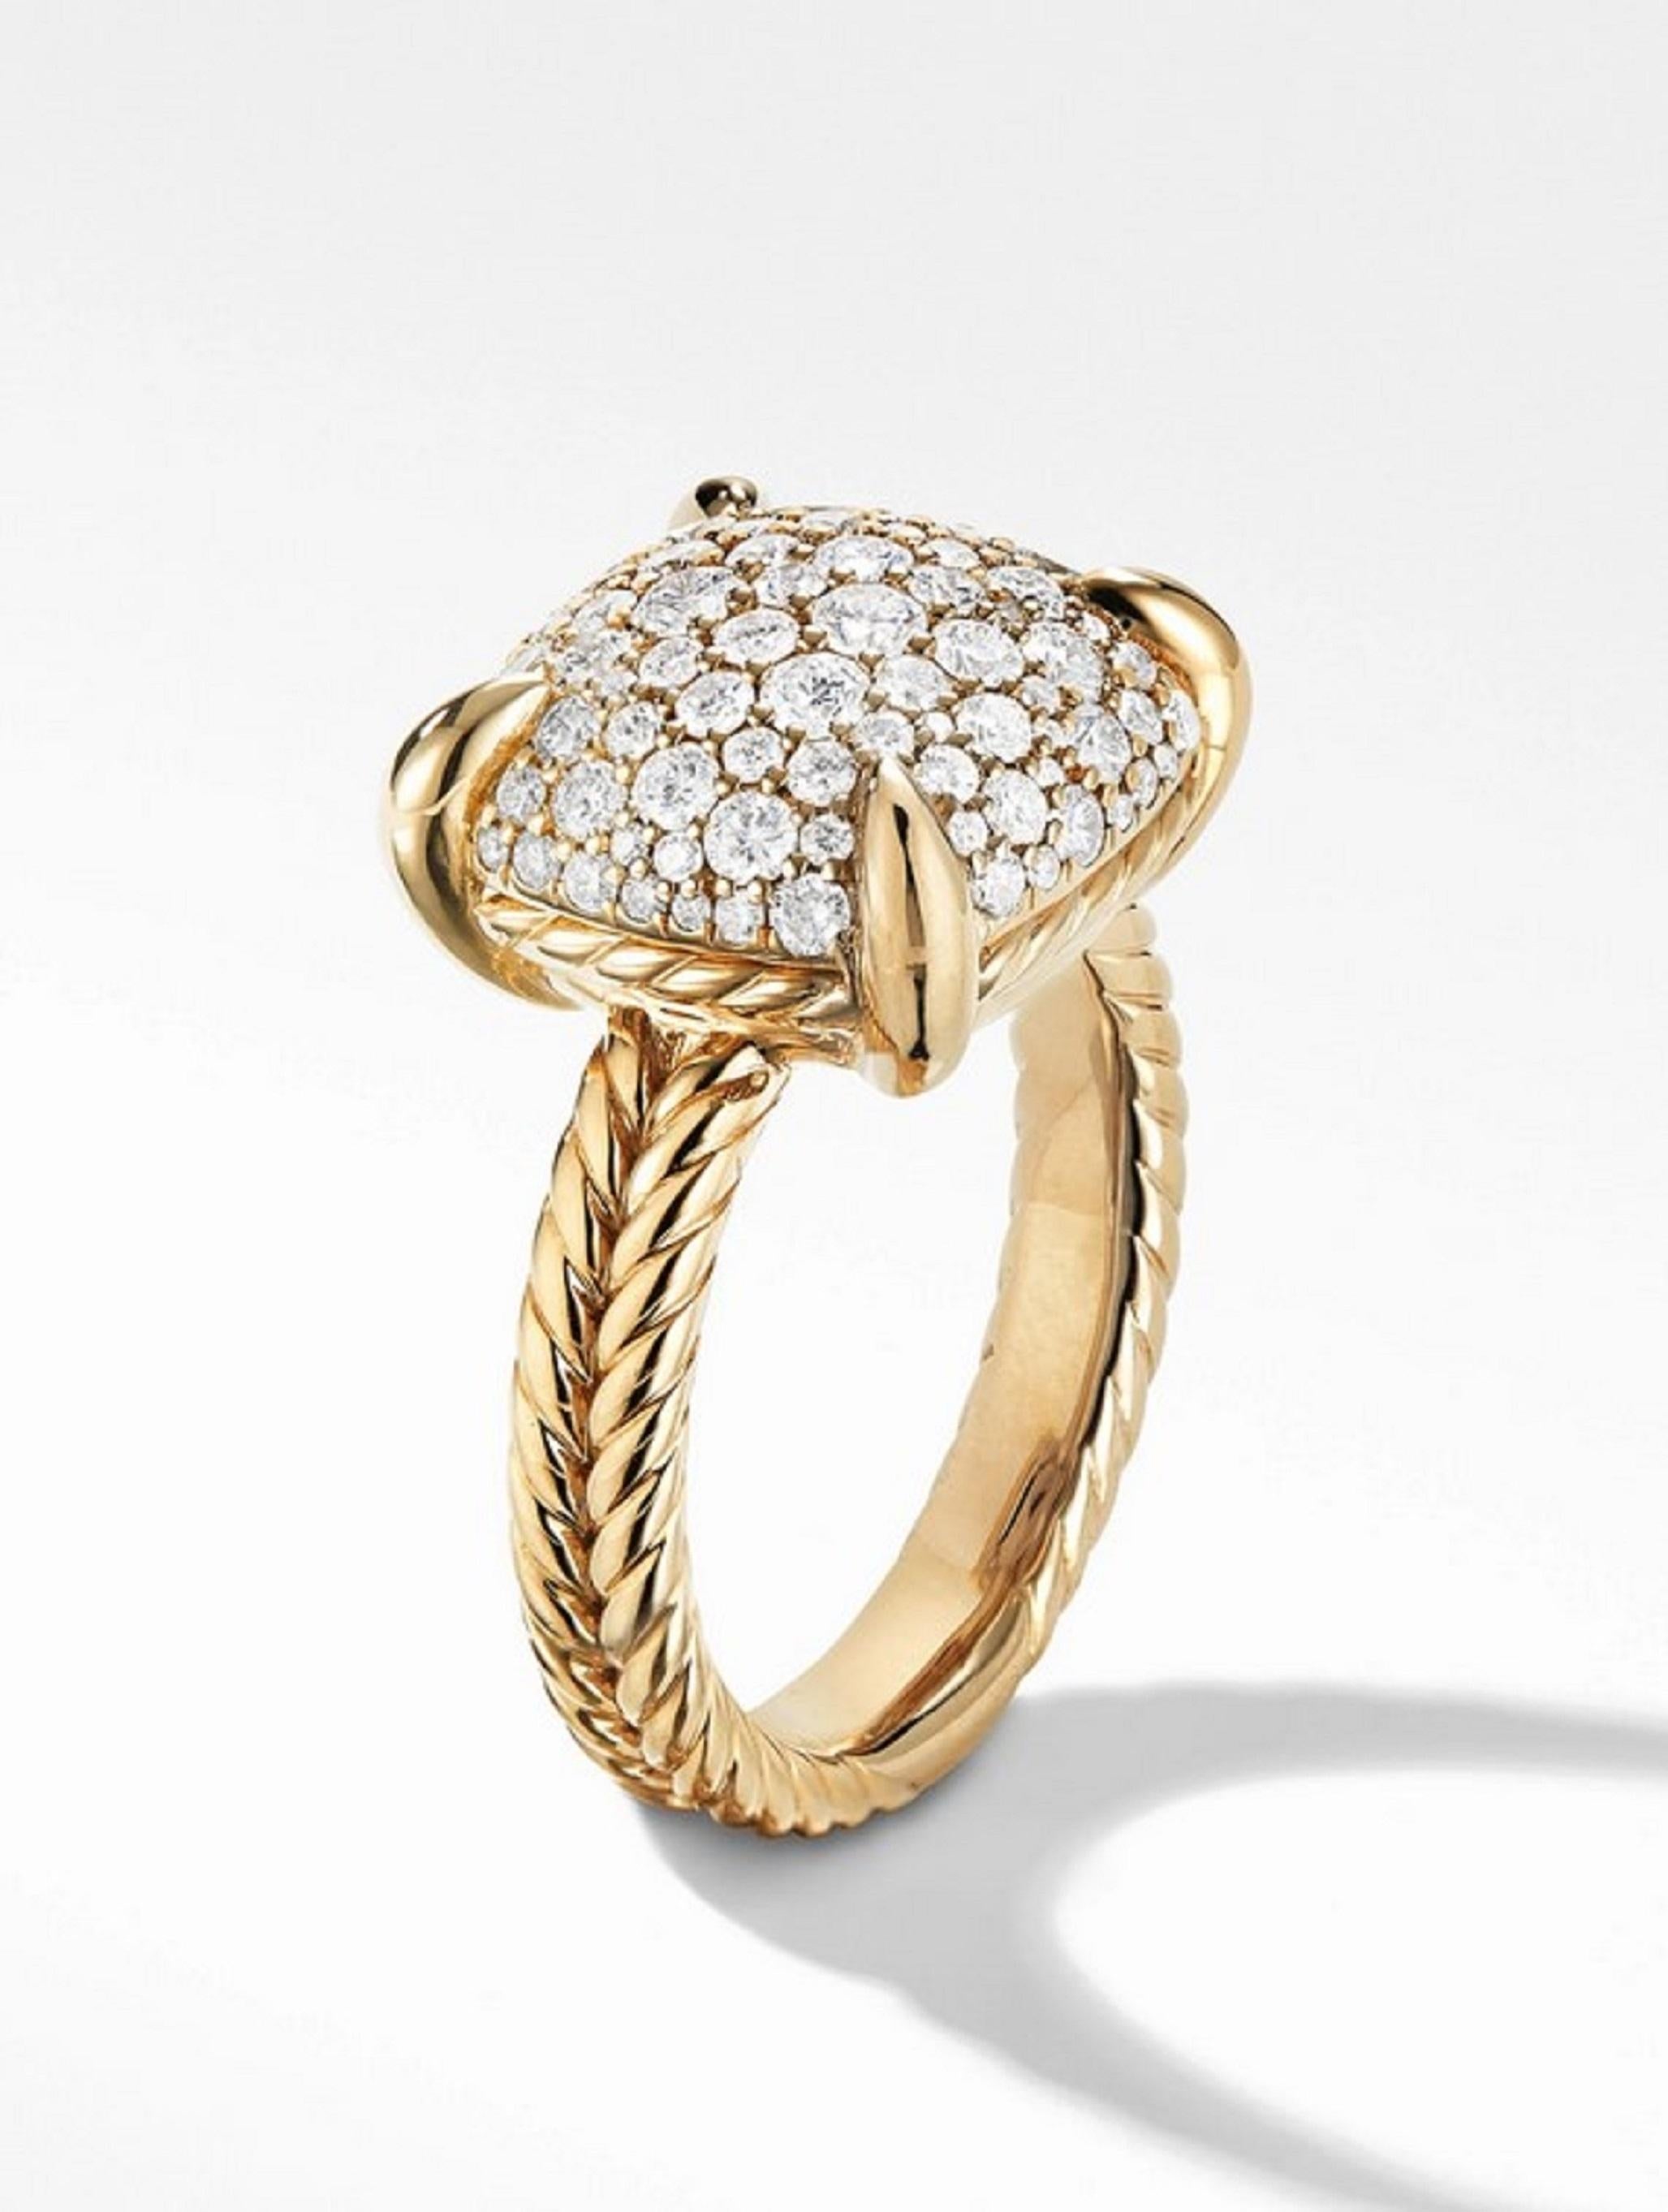 18k Yellow Gold
Pavé diamonds, 0.67 total carat weight
Ring, 11mm
Ring size: 7.5
David Yurman box included
Crafted in such way that takes ones eyes and heart.

This is an exclusive David Yurman Châtelaine collection, Statement or can be used as an